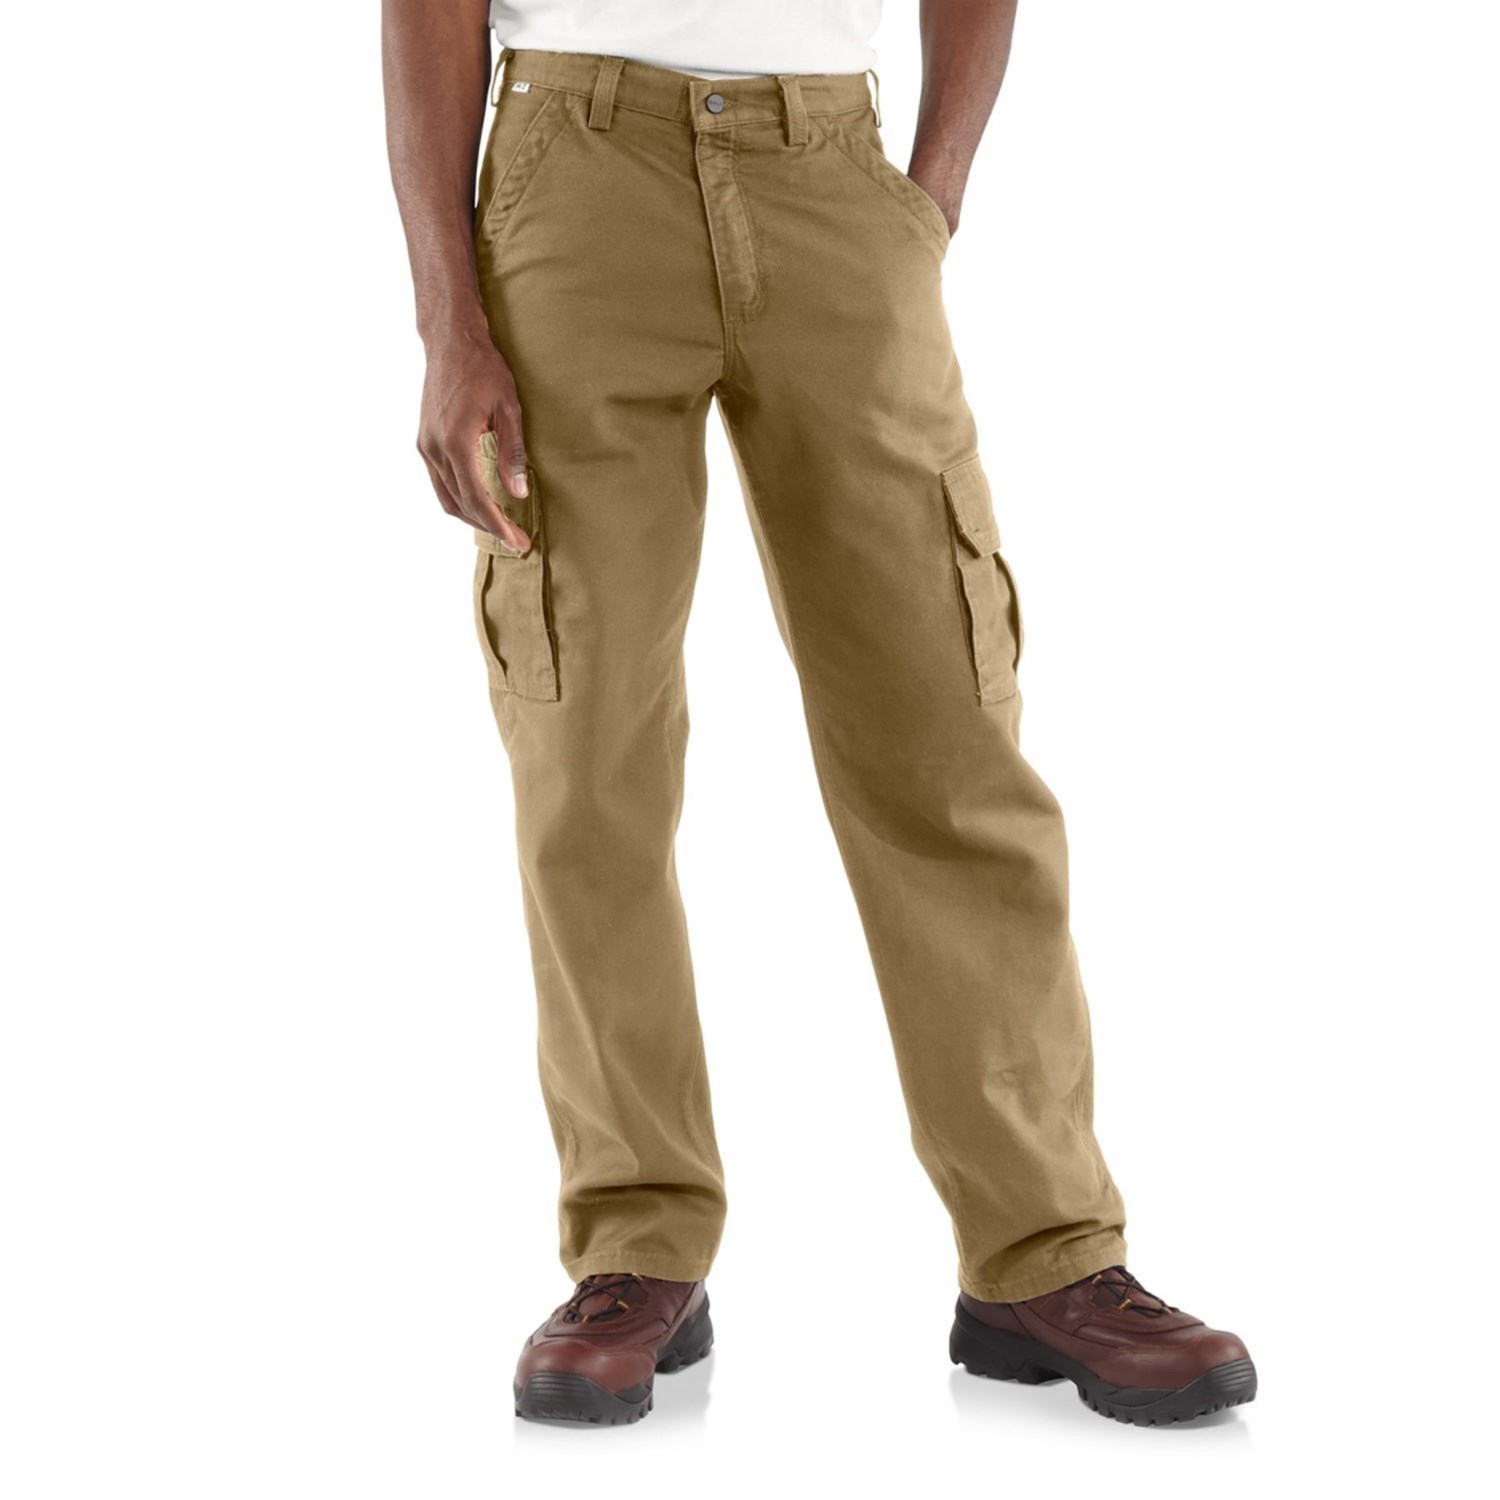 Carhartt FRB240 Flame-Resistant Canvas Cargo Pants - Factory Seconds